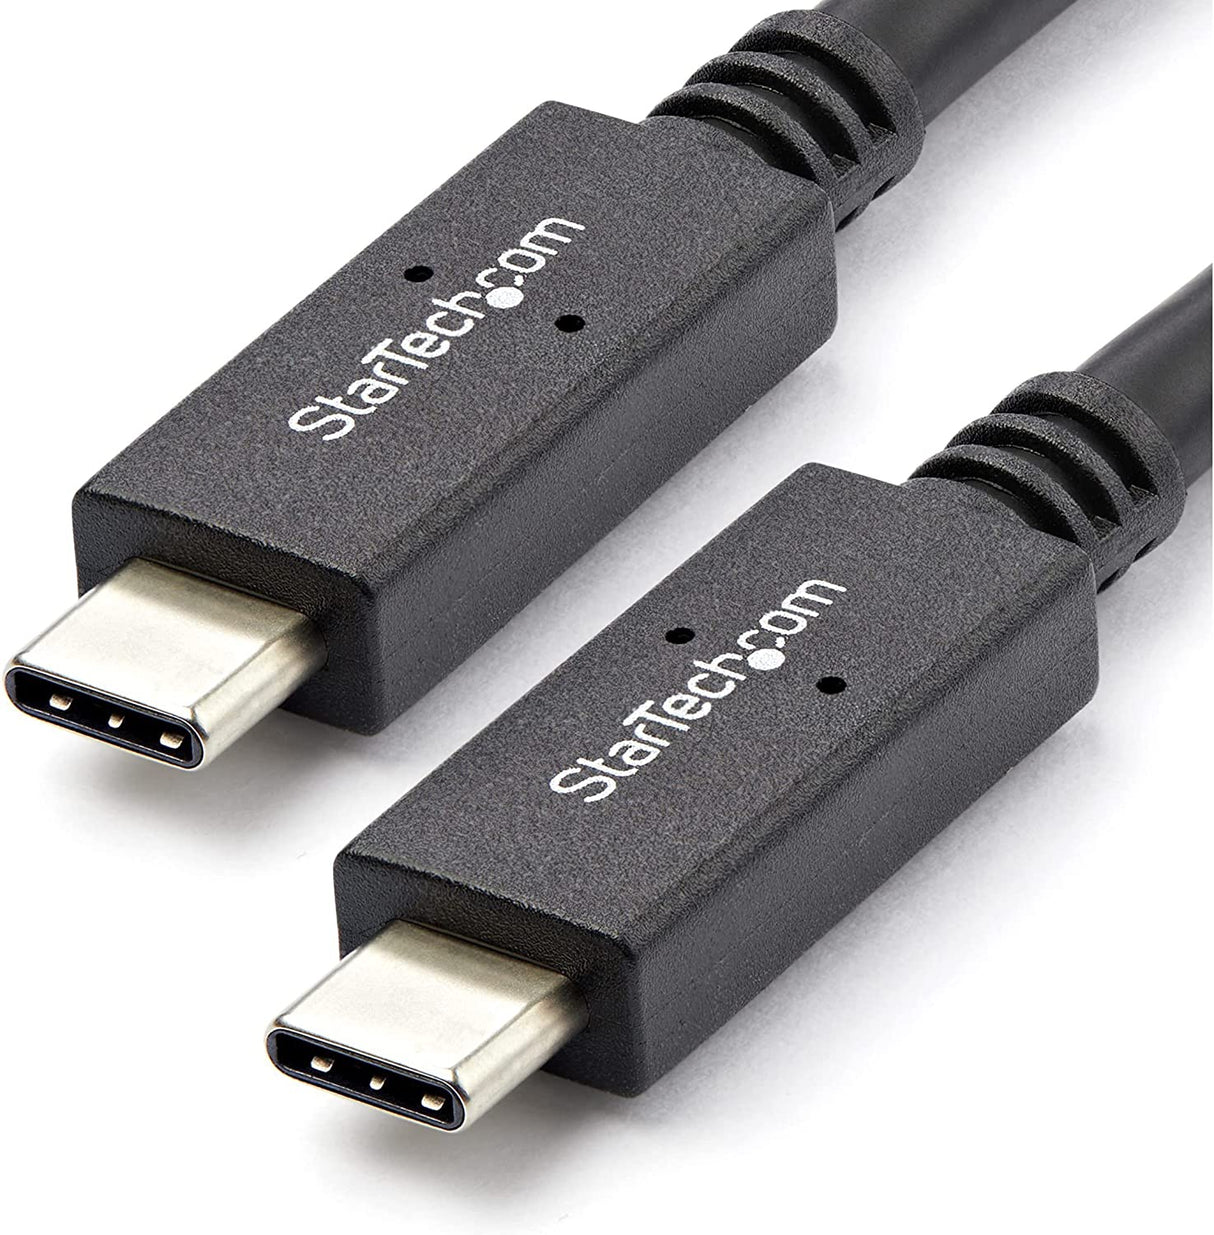 StarTech.com USB C Cable 3 ft / 1m with Power Delivery (USB PD) Power Pass Through Charging USB to USB Cord (USB31C5C1M)